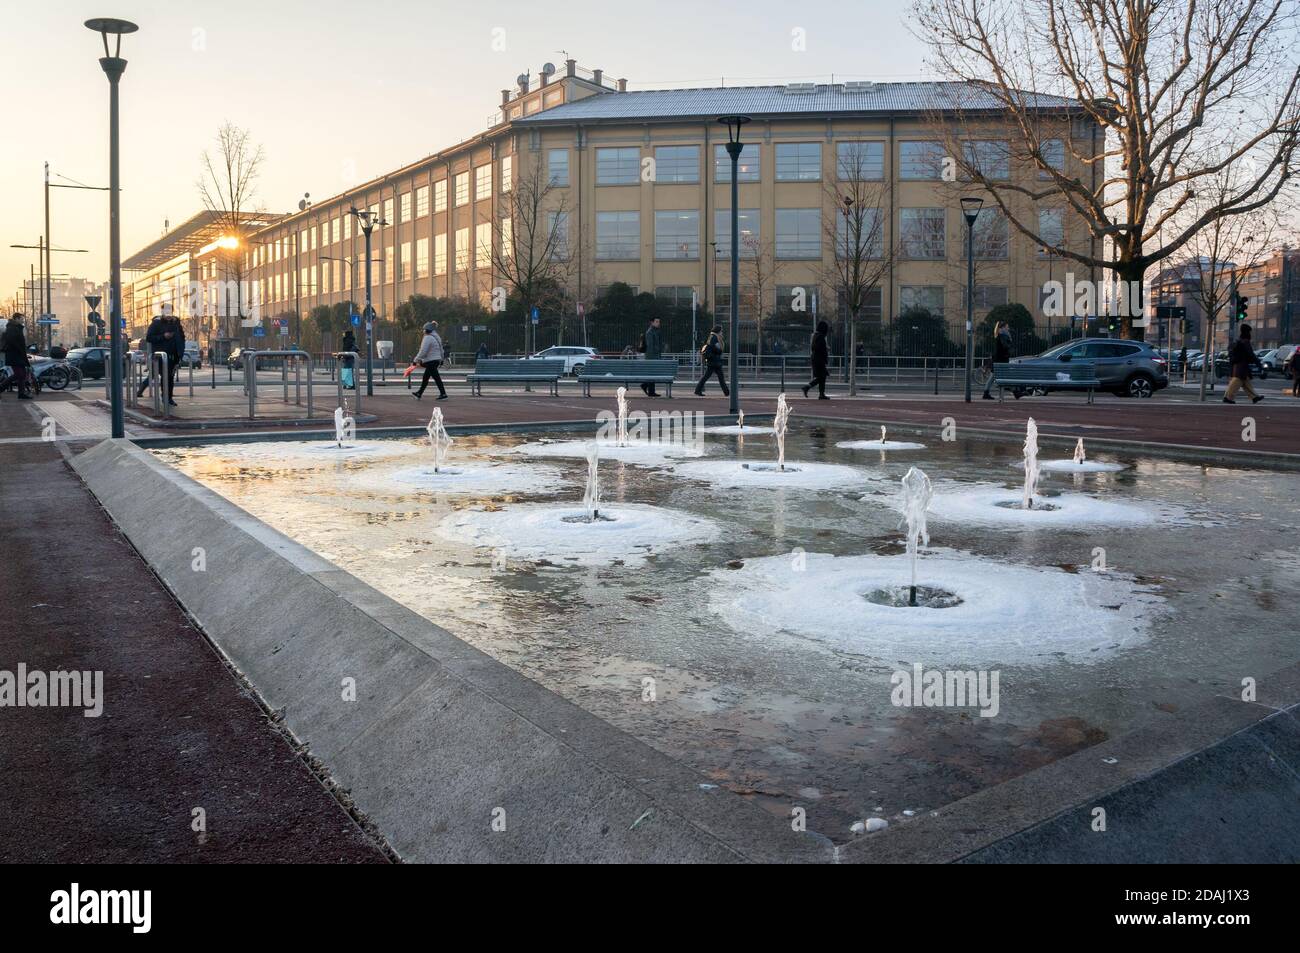 Frozen fountains on the background of walking people and buildings on the street in the winter, in a residential area of Portello of Milan. Stock Photo